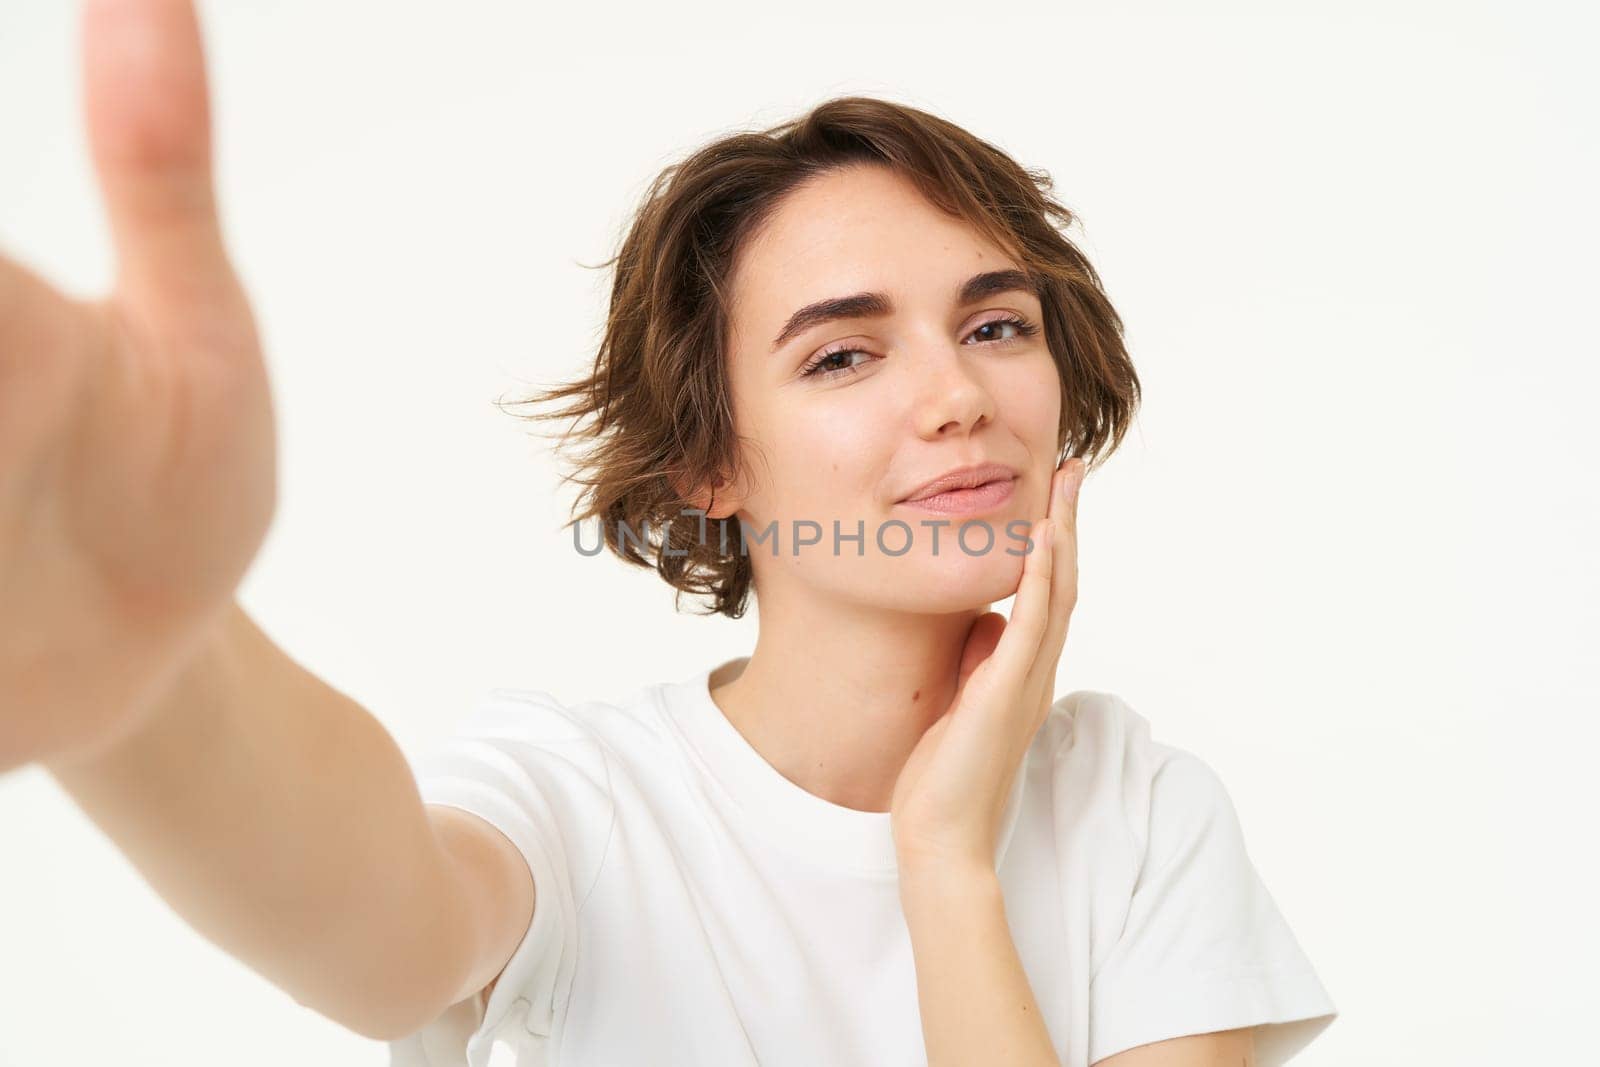 Lifestyle and people. Young woman smiling and taking selfie, posing for photo, holding camera with one hand, standing over white background.